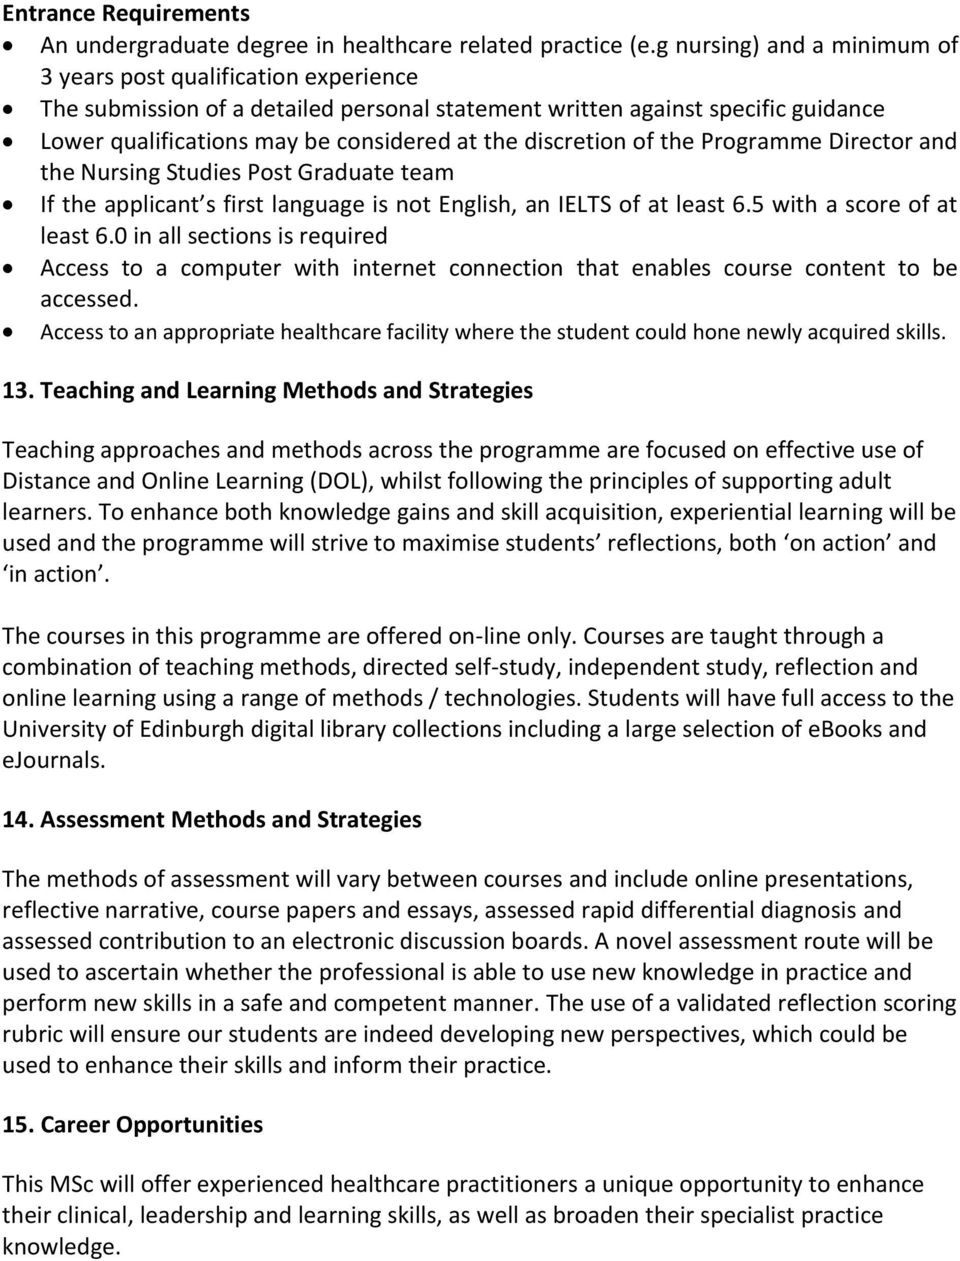 discretion of the Programme Director and the Nursing Studies Post Graduate team If the applicant s first language is not English, an IELTS of at least 6.5 with a score of at least 6.